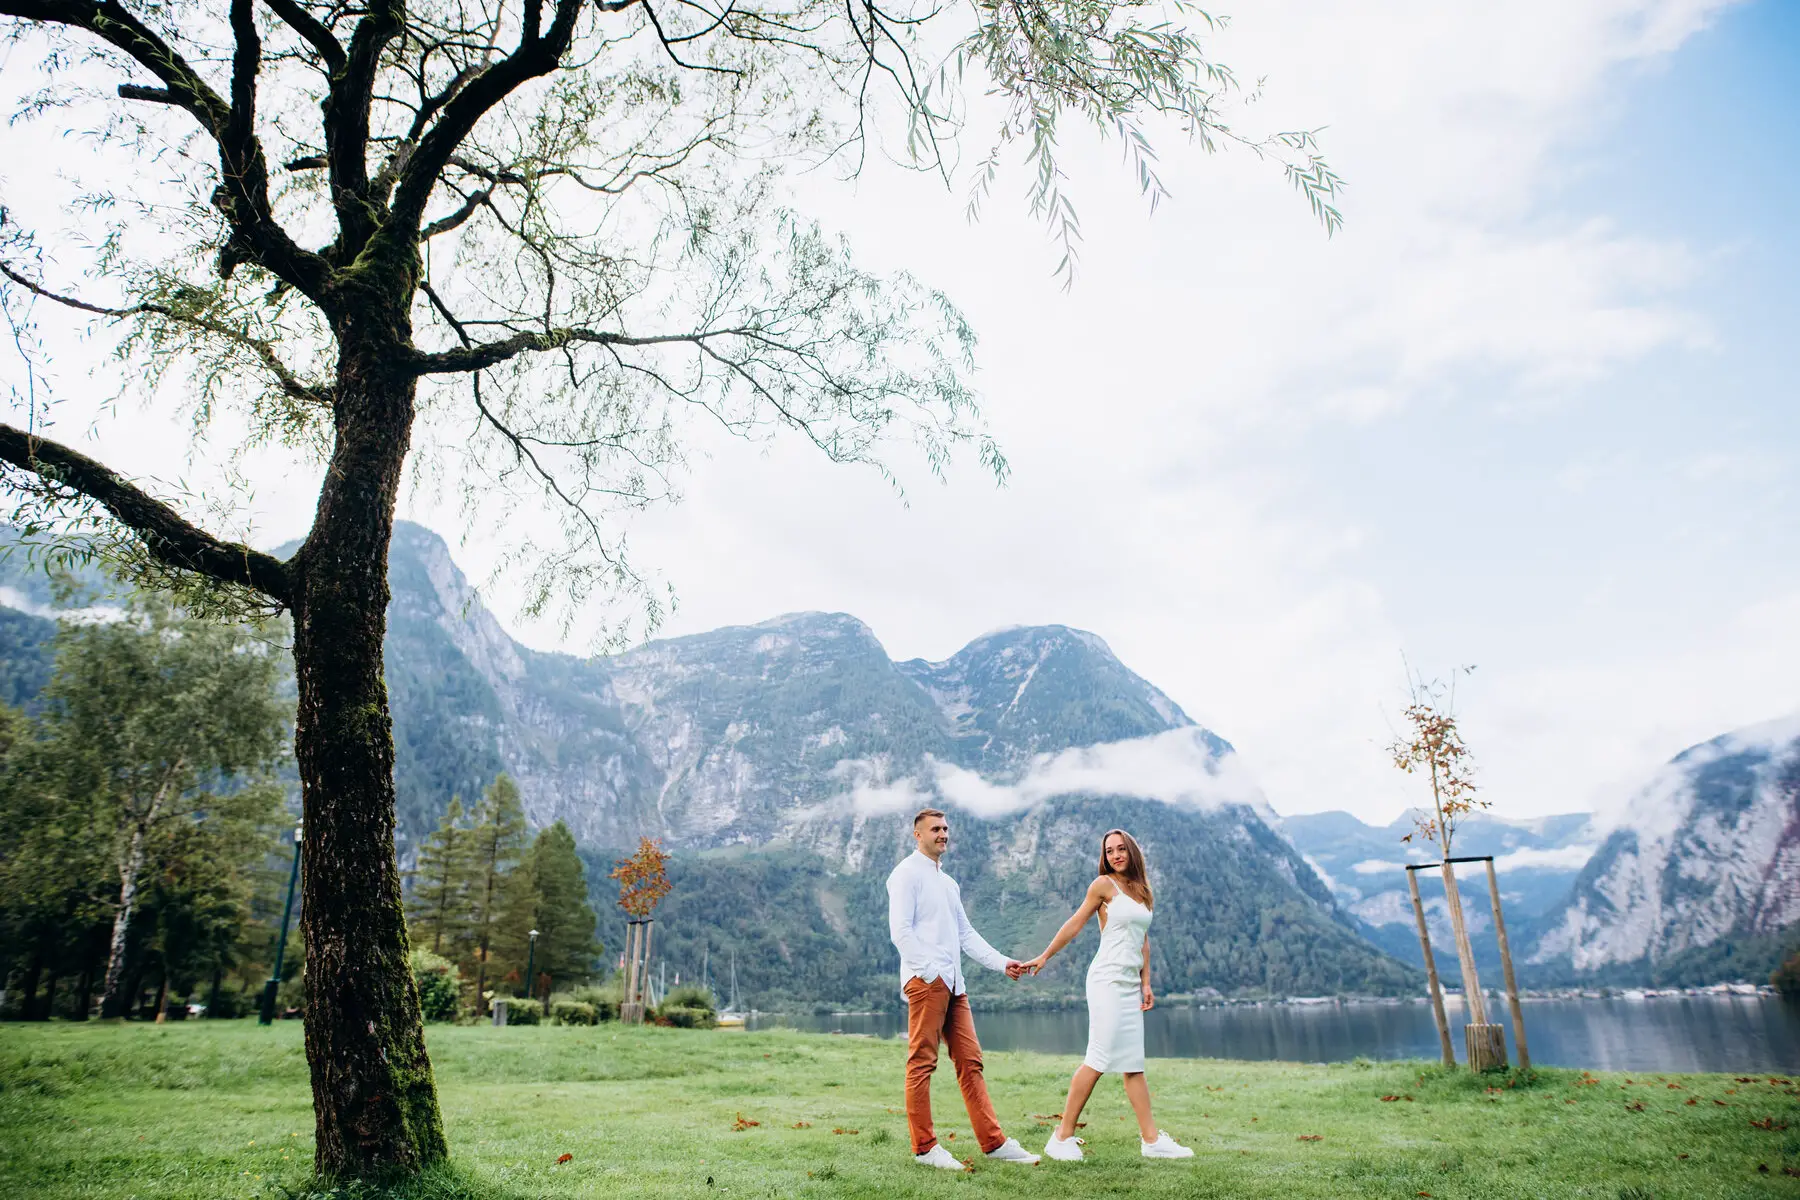 Couple on a date in a park in Austria